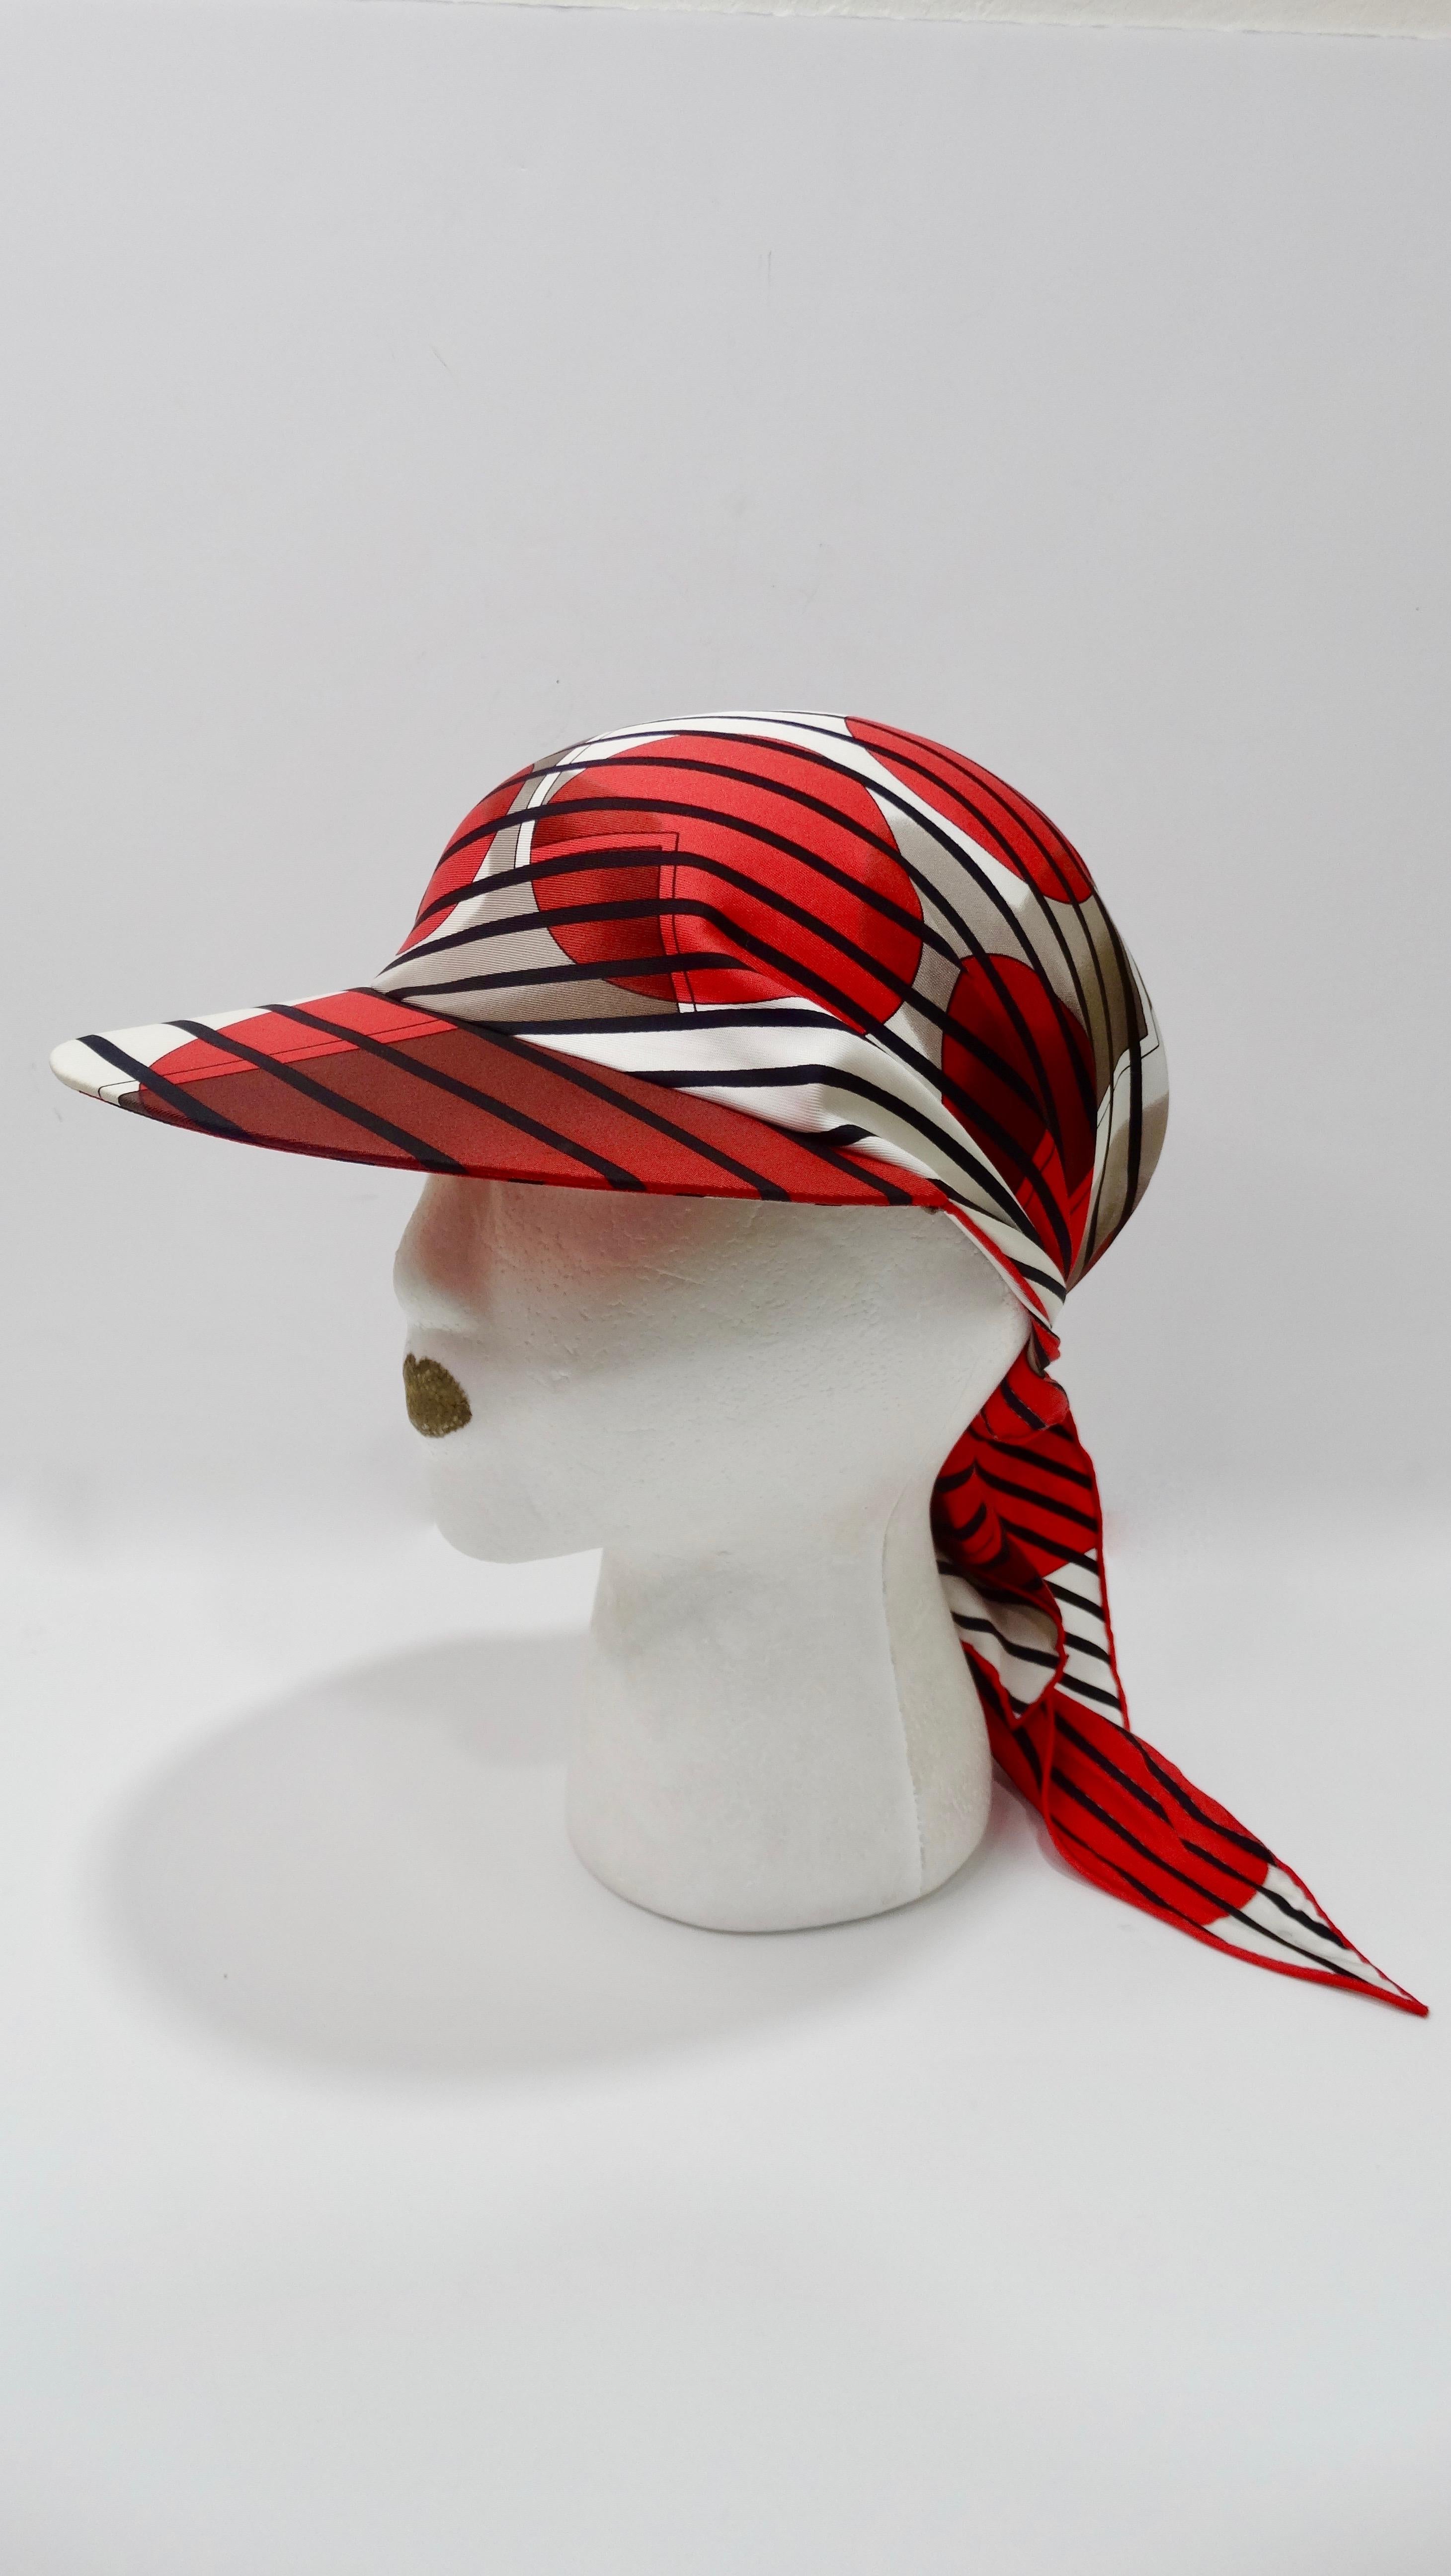 Relax by the beach or pool in style with this adorable Hermes scarf cap! Designed by Bali Barret for Hermes circa 2005, the scarf displays bold black stripes, vibrant red bubbles and a large H with a 